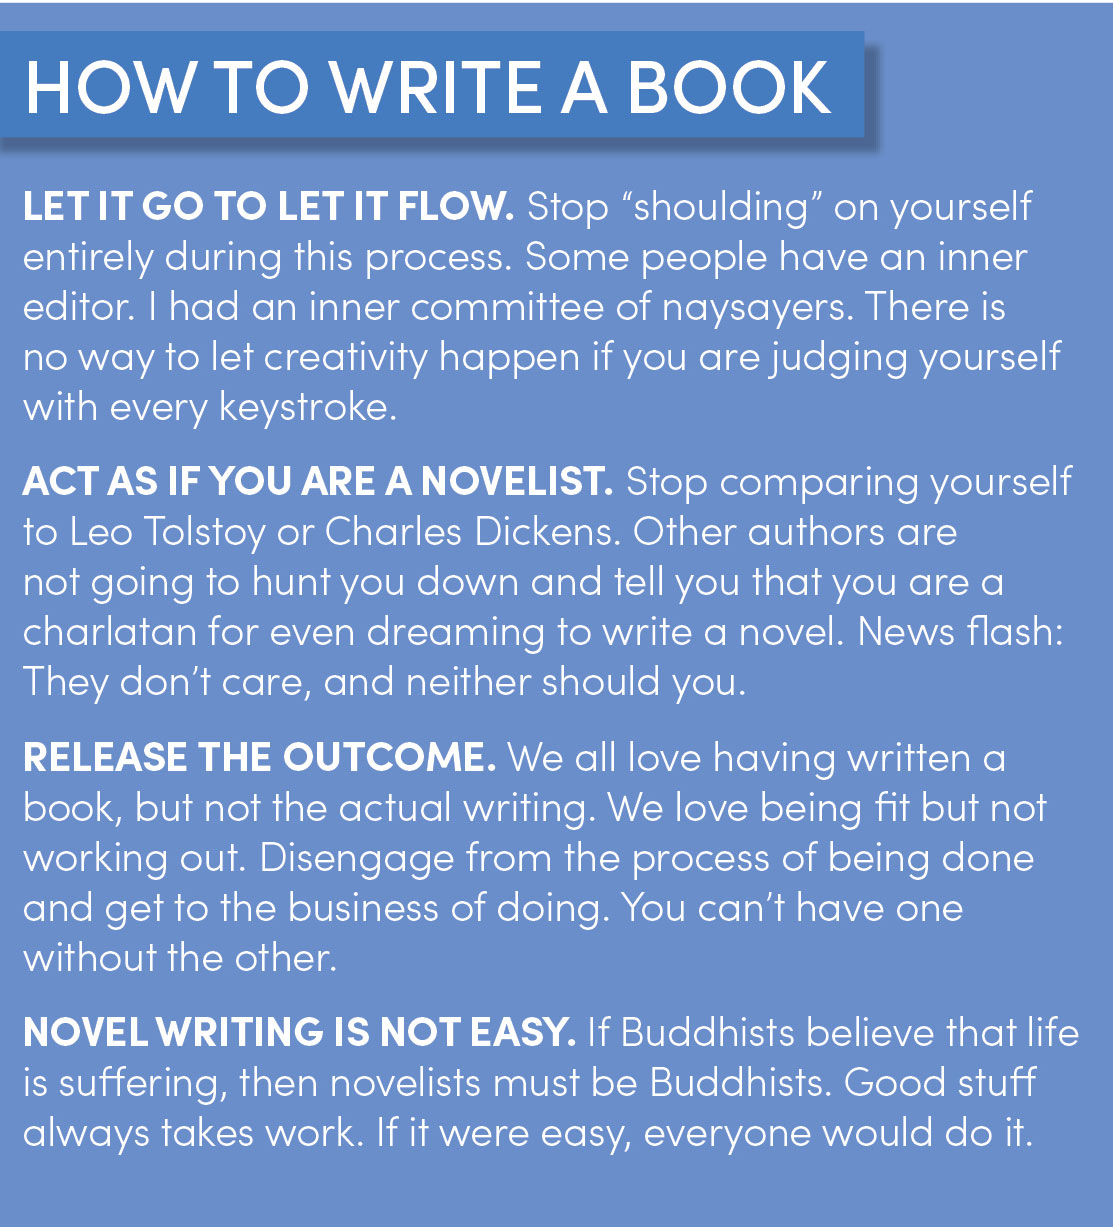 Could You Write a Book in a Month?